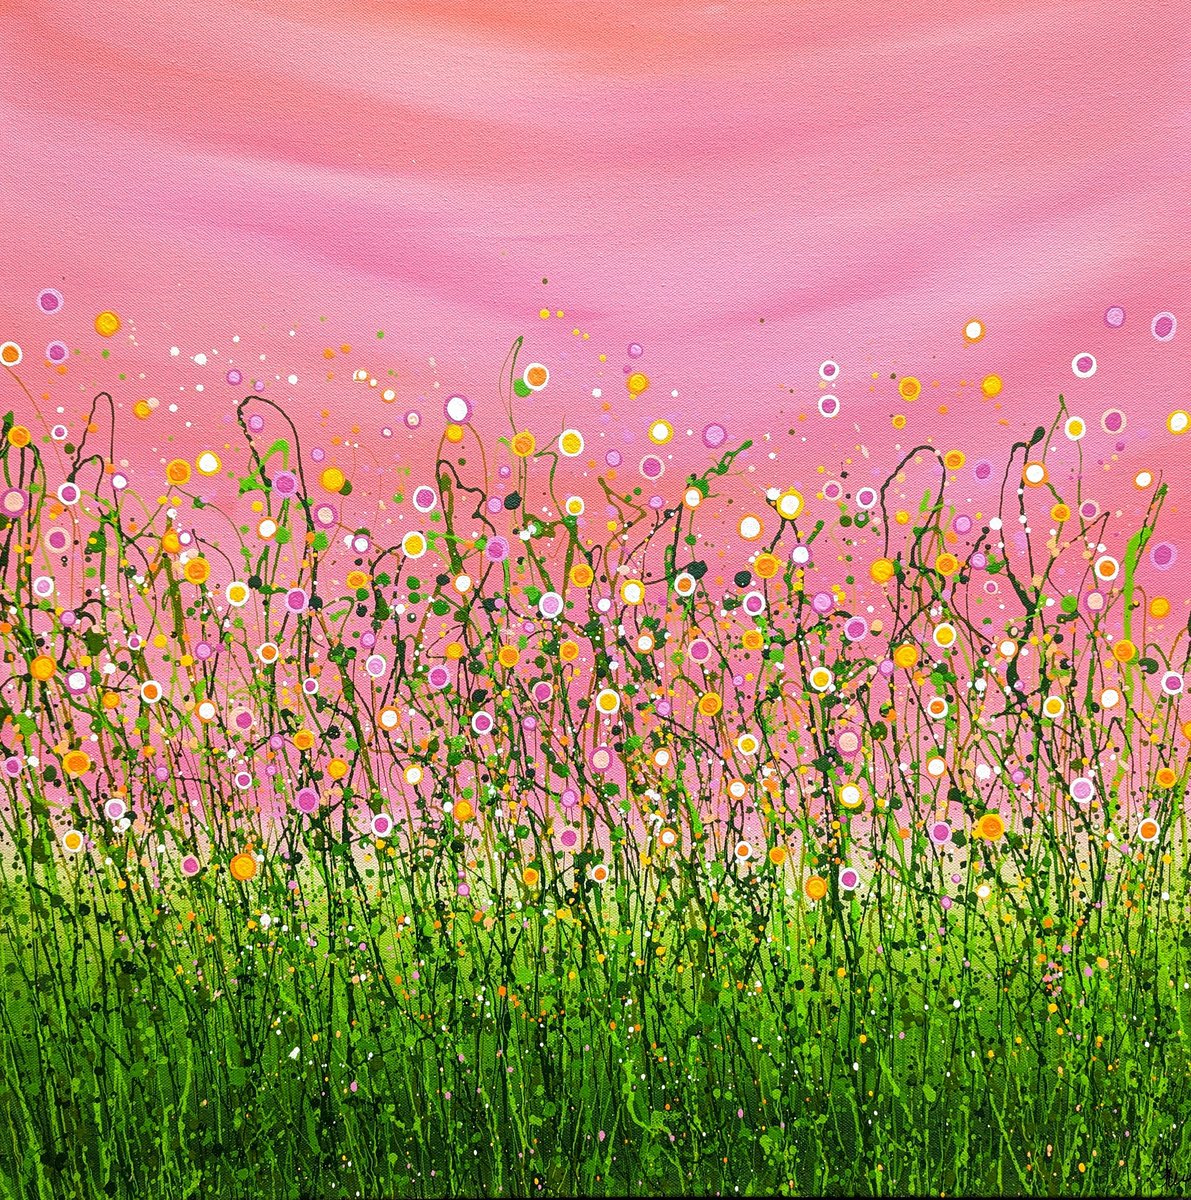 Blushing Confetti Meadows #3 by Lucy Moore